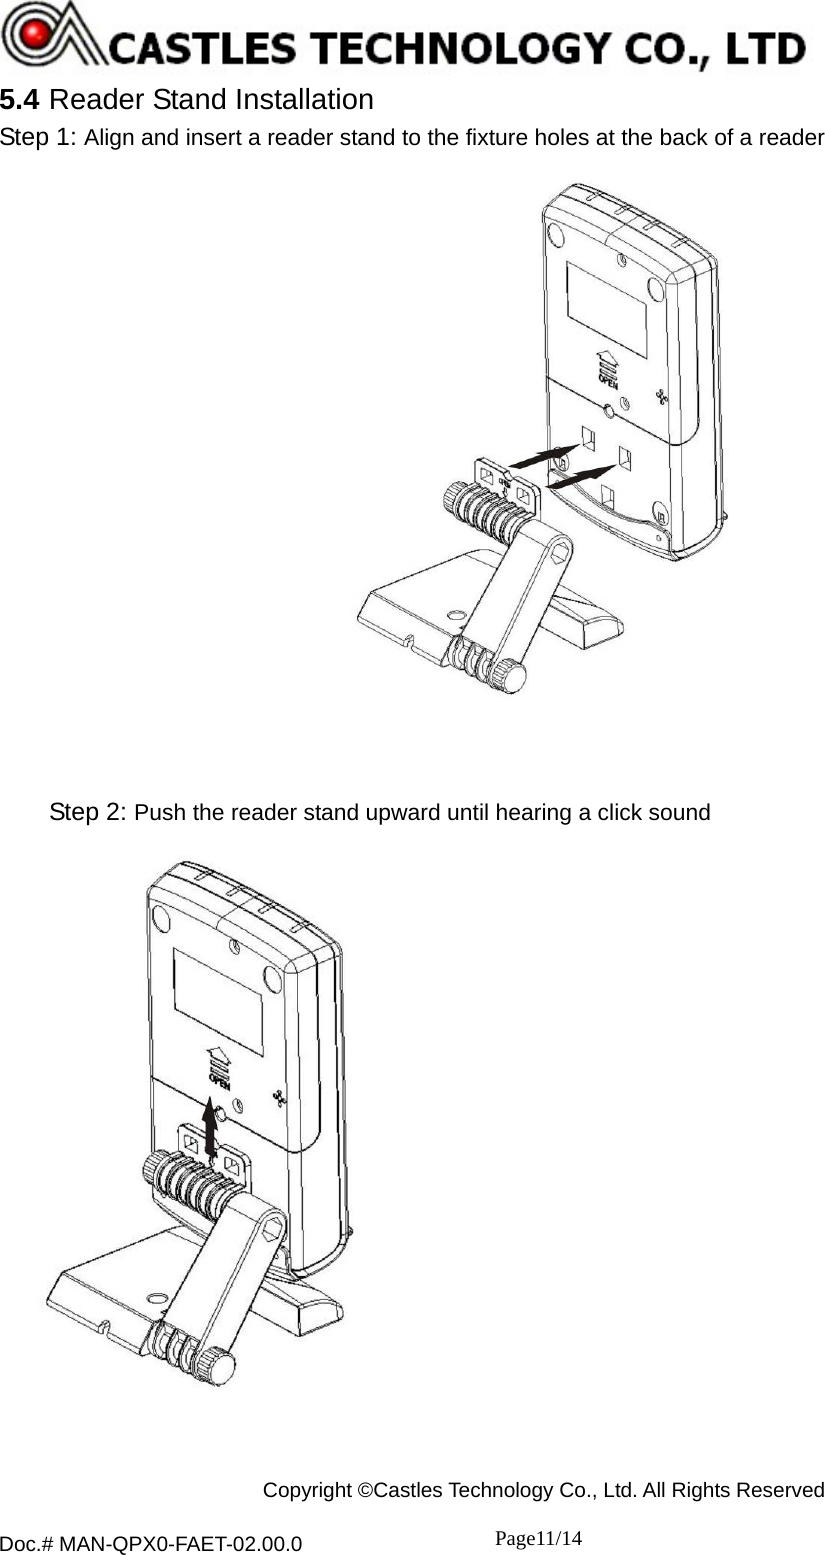  Copyright ©Castles Technology Co., Ltd. All Rights Reserved  Doc.# MAN-QPX0-FAET-02.00.0               Page11/14    5.4 Reader Stand Installation Step 1: Align and insert a reader stand to the fixture holes at the back of a reader        Step 2: Push the reader stand upward until hearing a click sound   